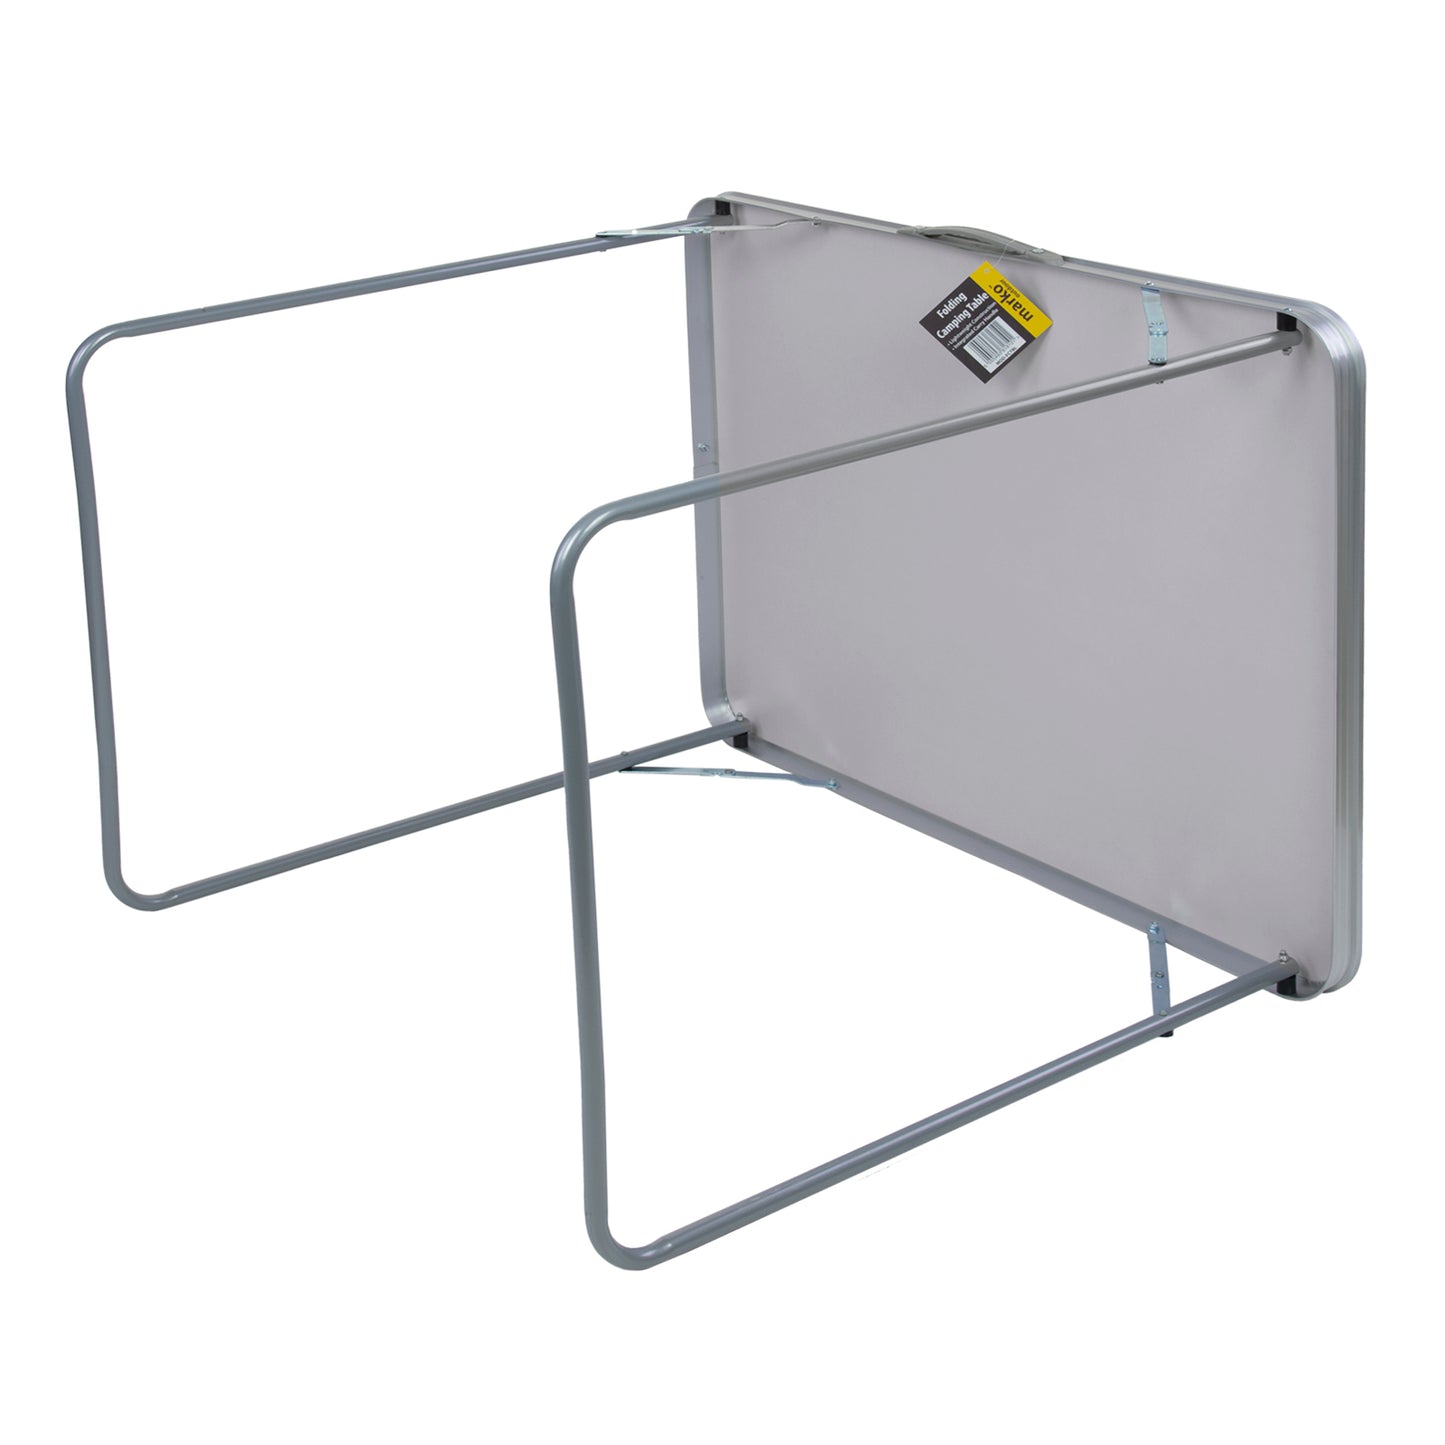 80cm Folding Camping Table